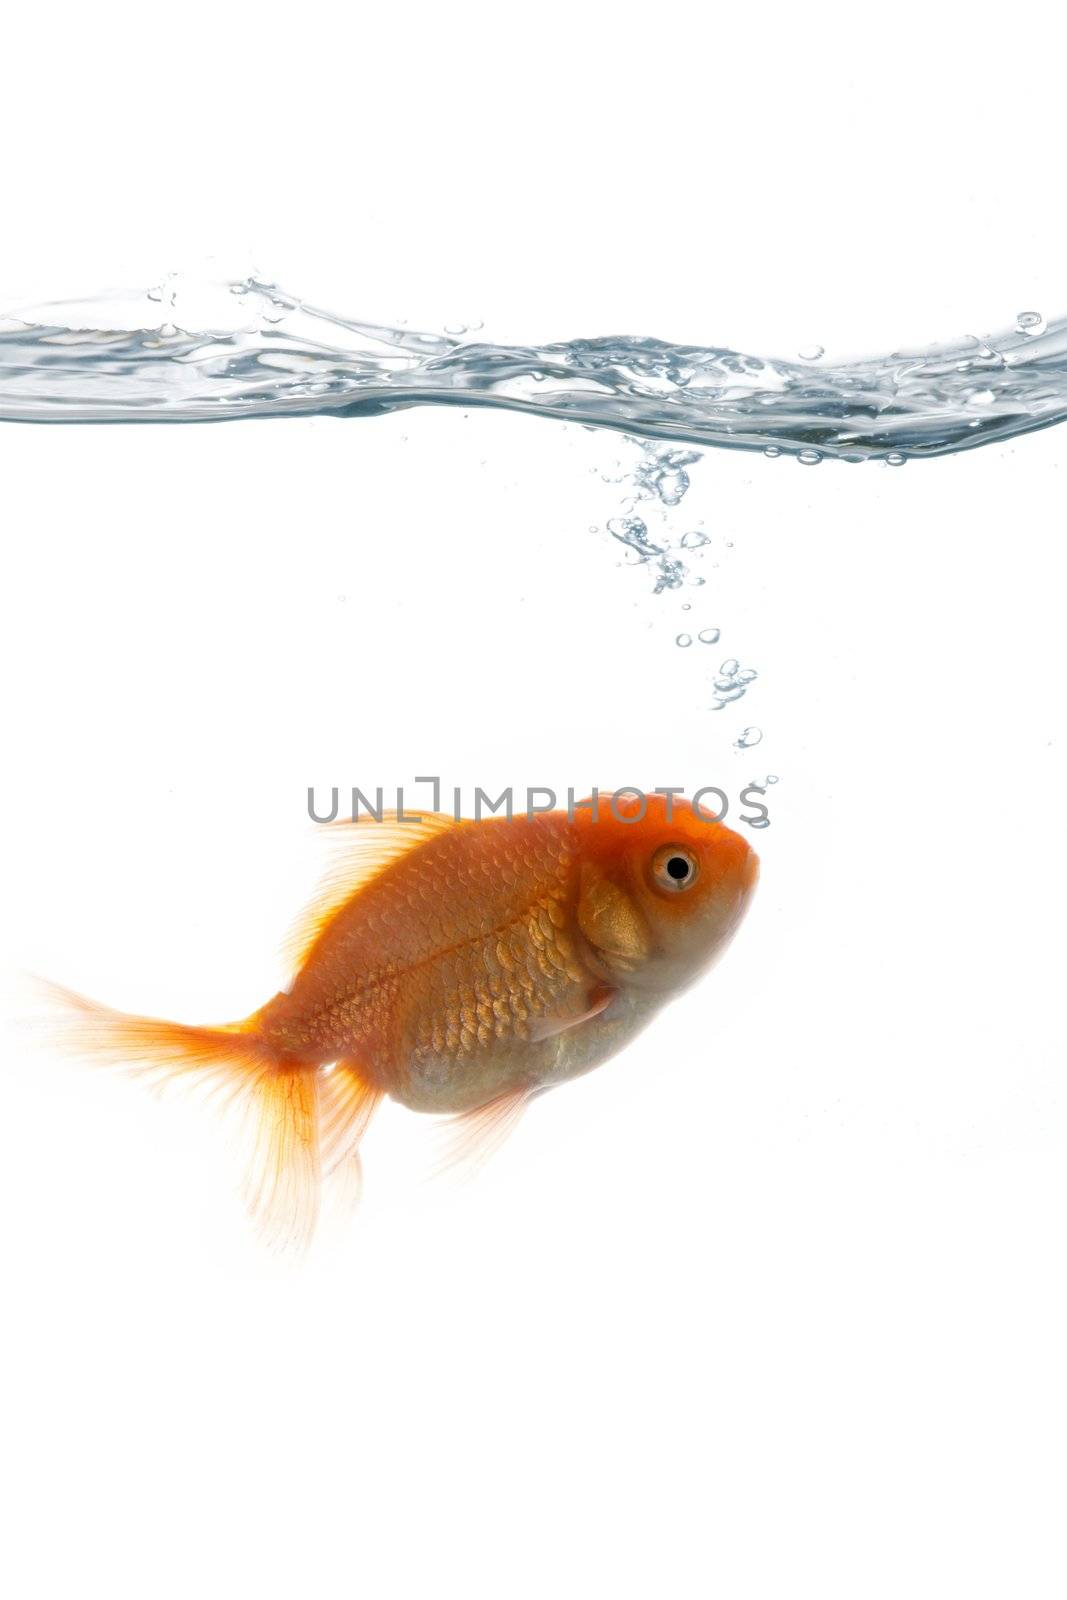 An image of goldfish "breathing" in water